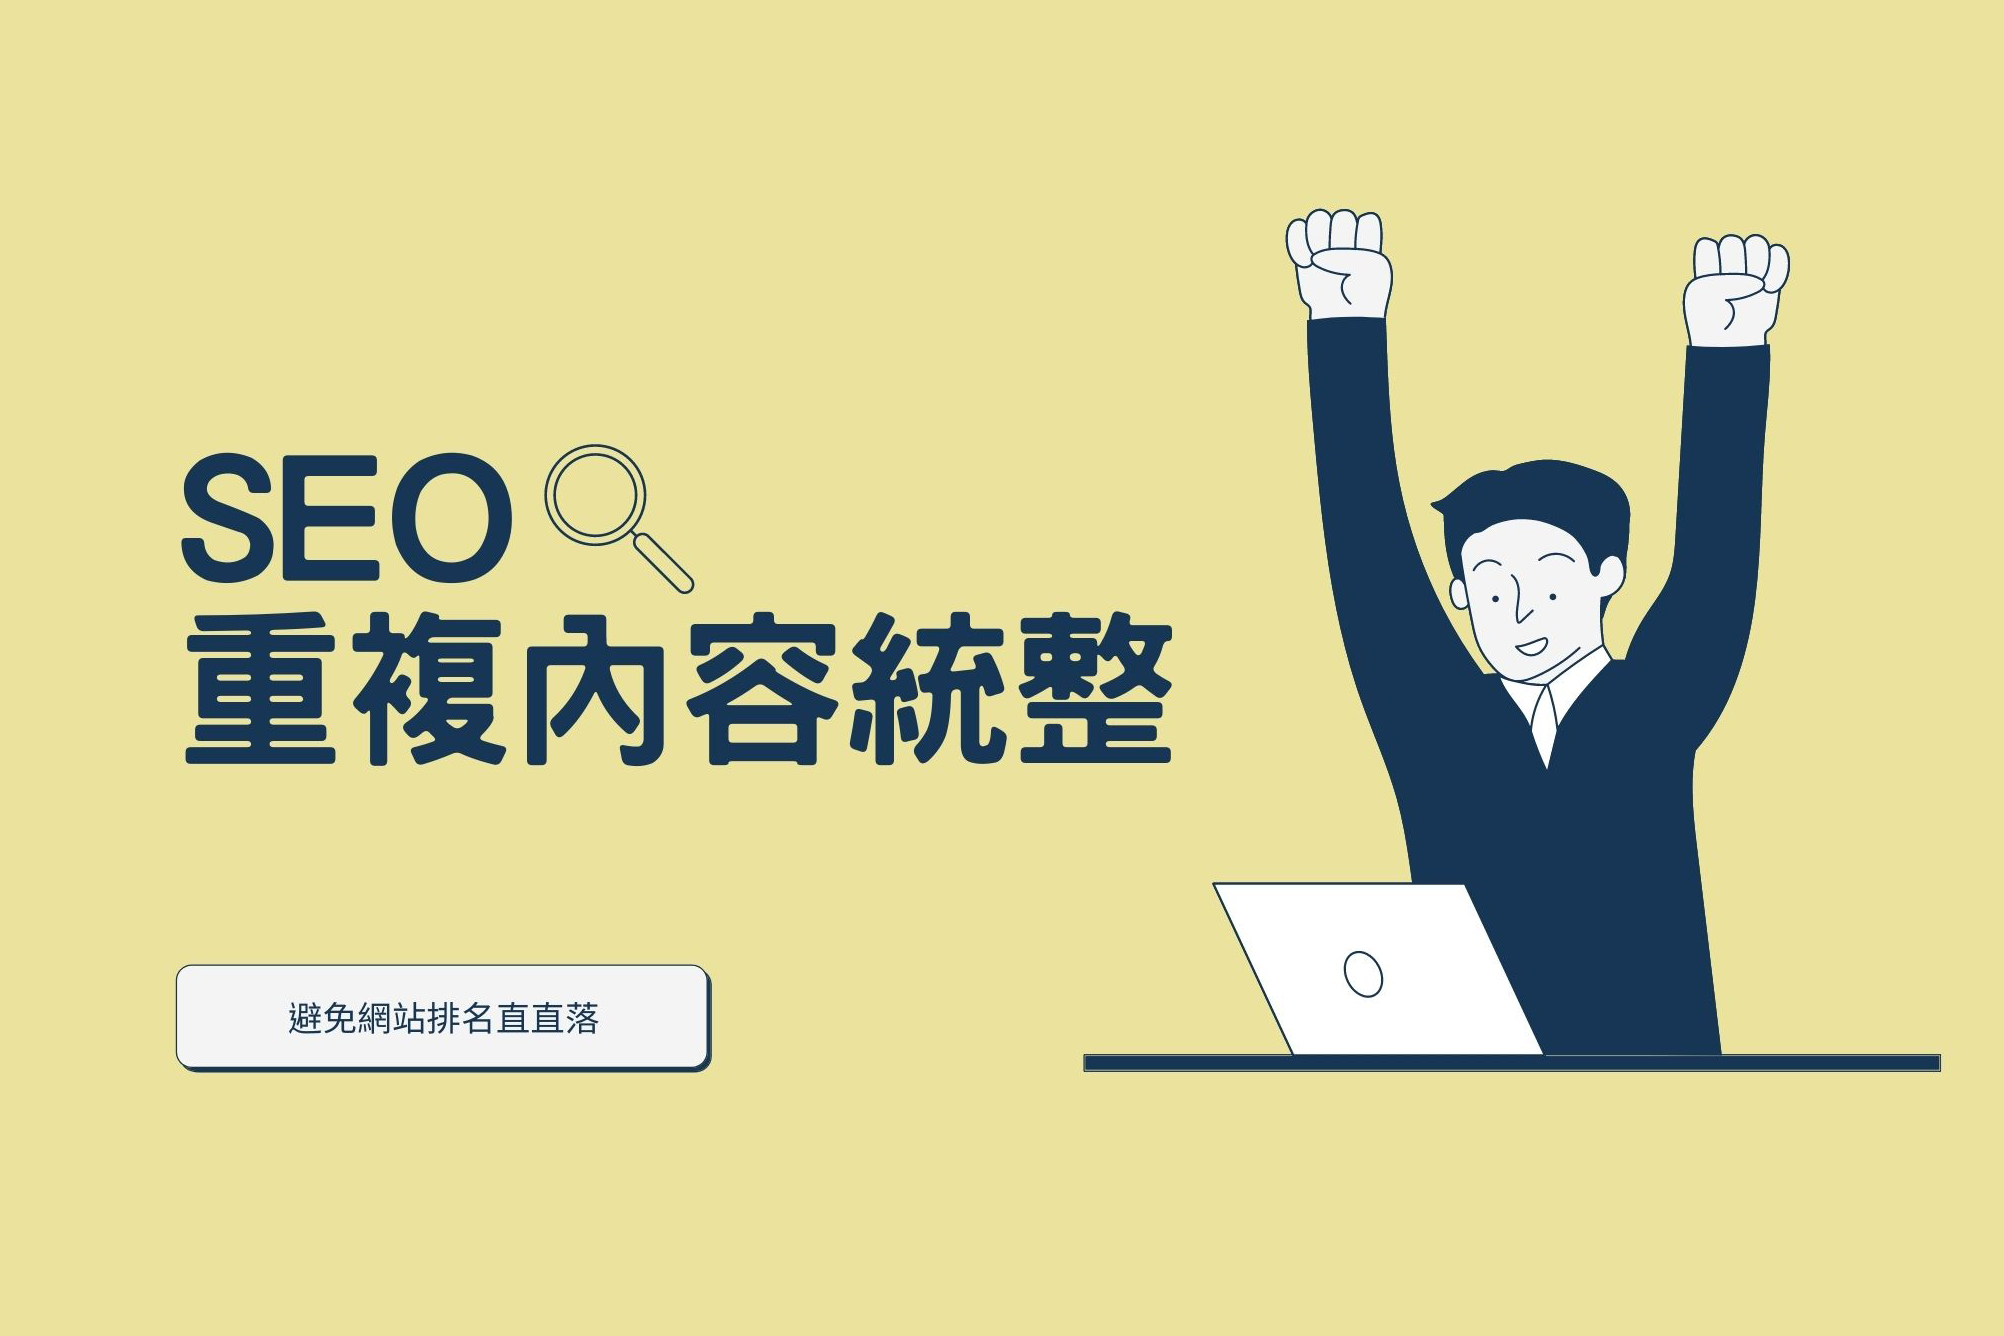 Read more about the article SEO 重複內容統整：7種常見情況解析，避免網站排名直直落